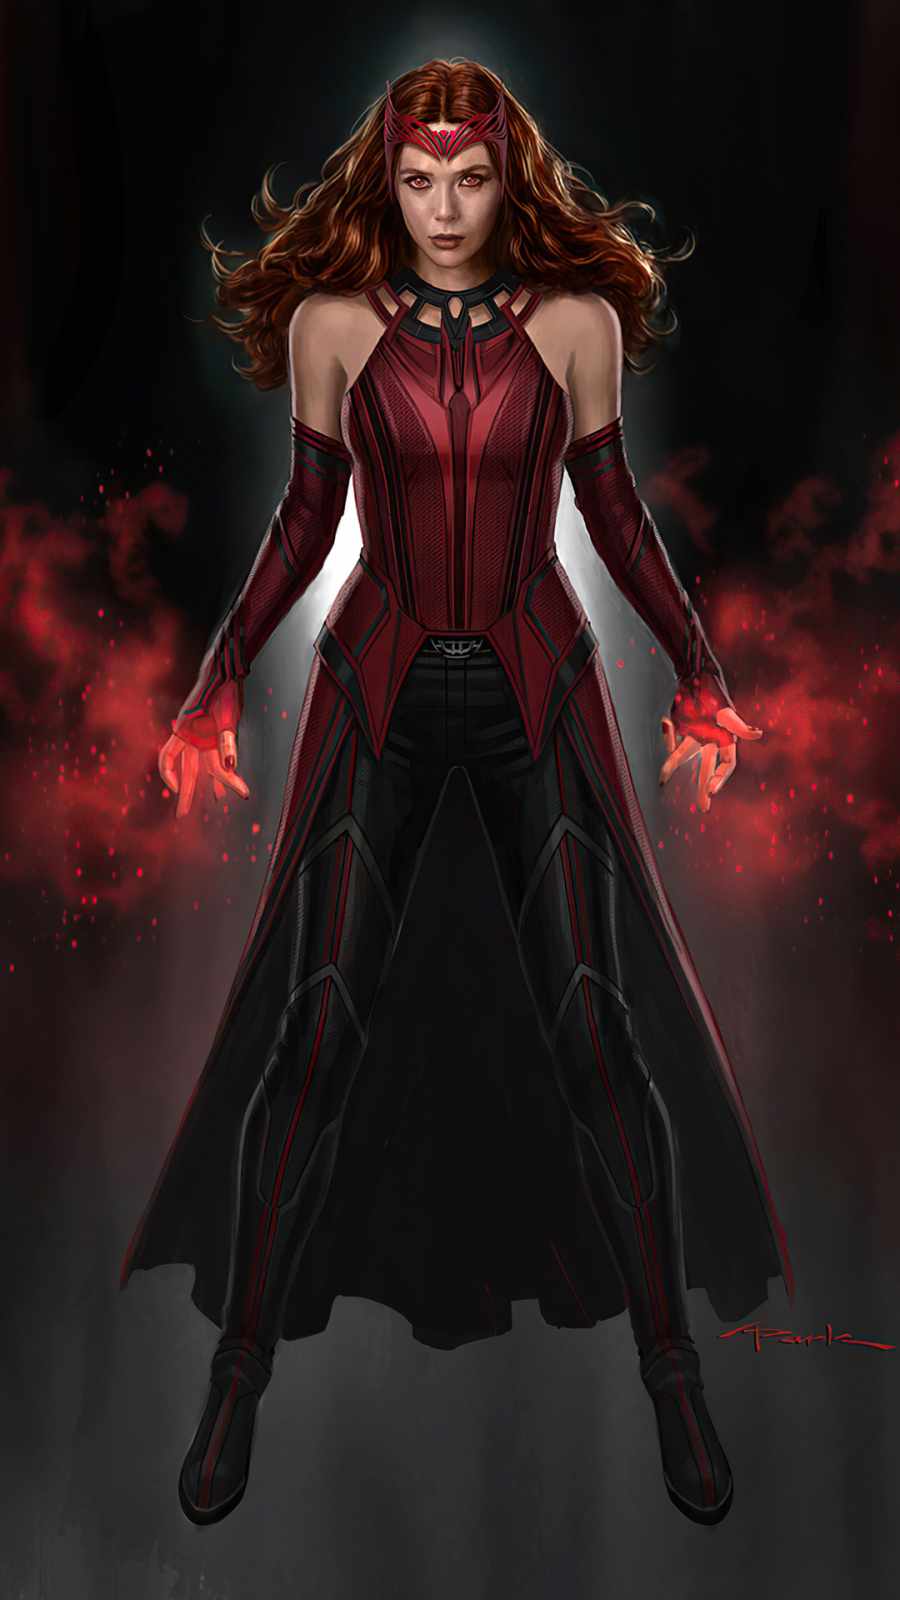 Scarlet Witch IPhone Wallpaper Wallpaper, iPhone Wallpaper